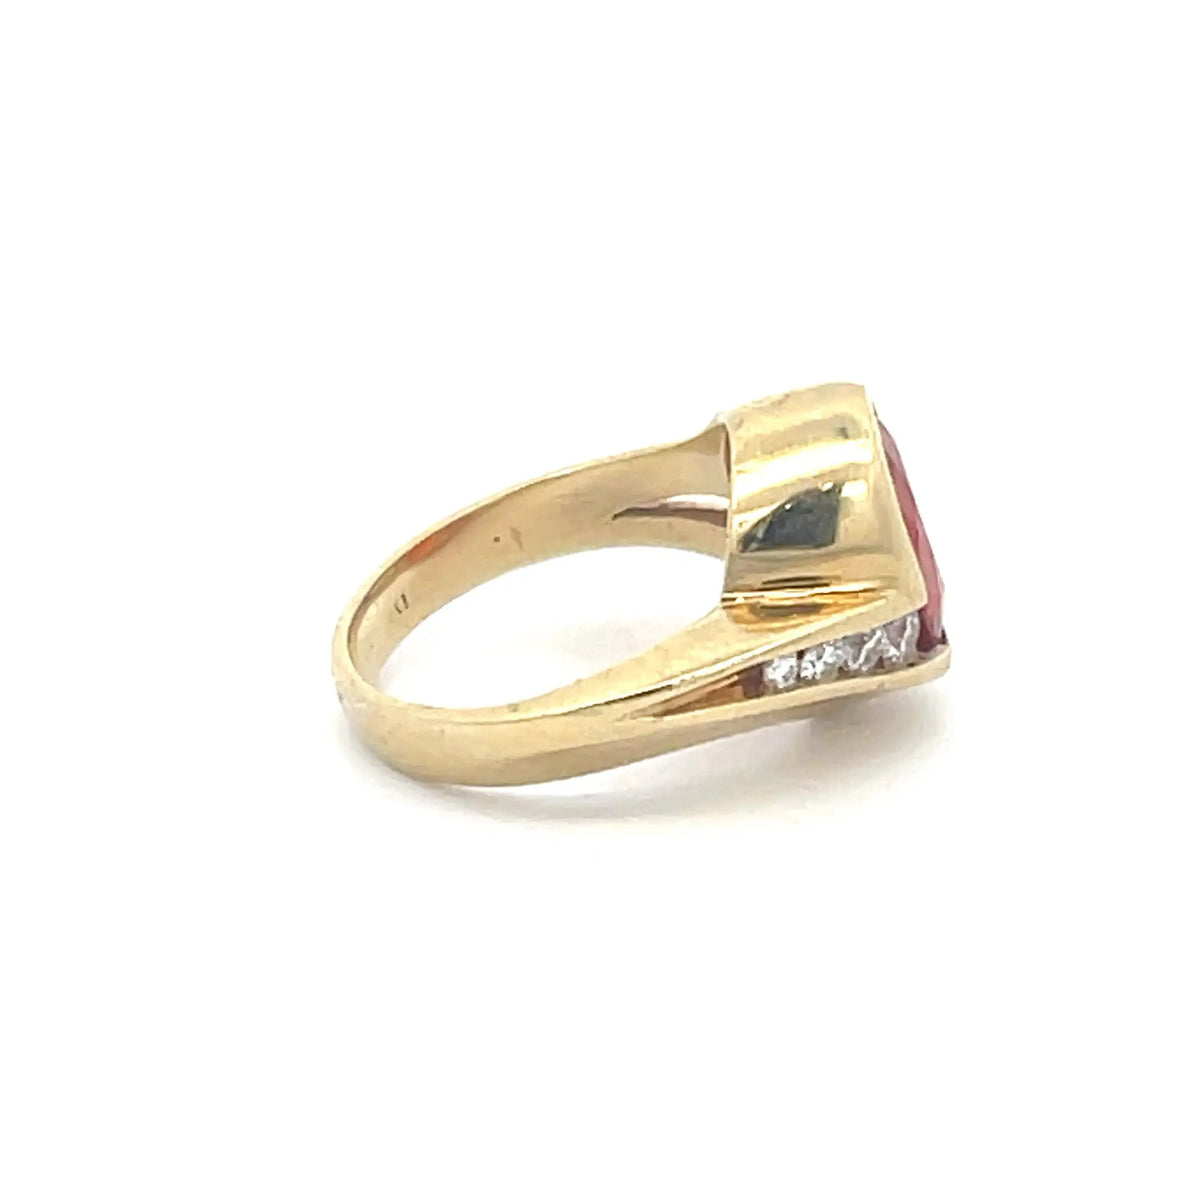 Vintage Fire Opal Ring Vintage at the Squash Blossom